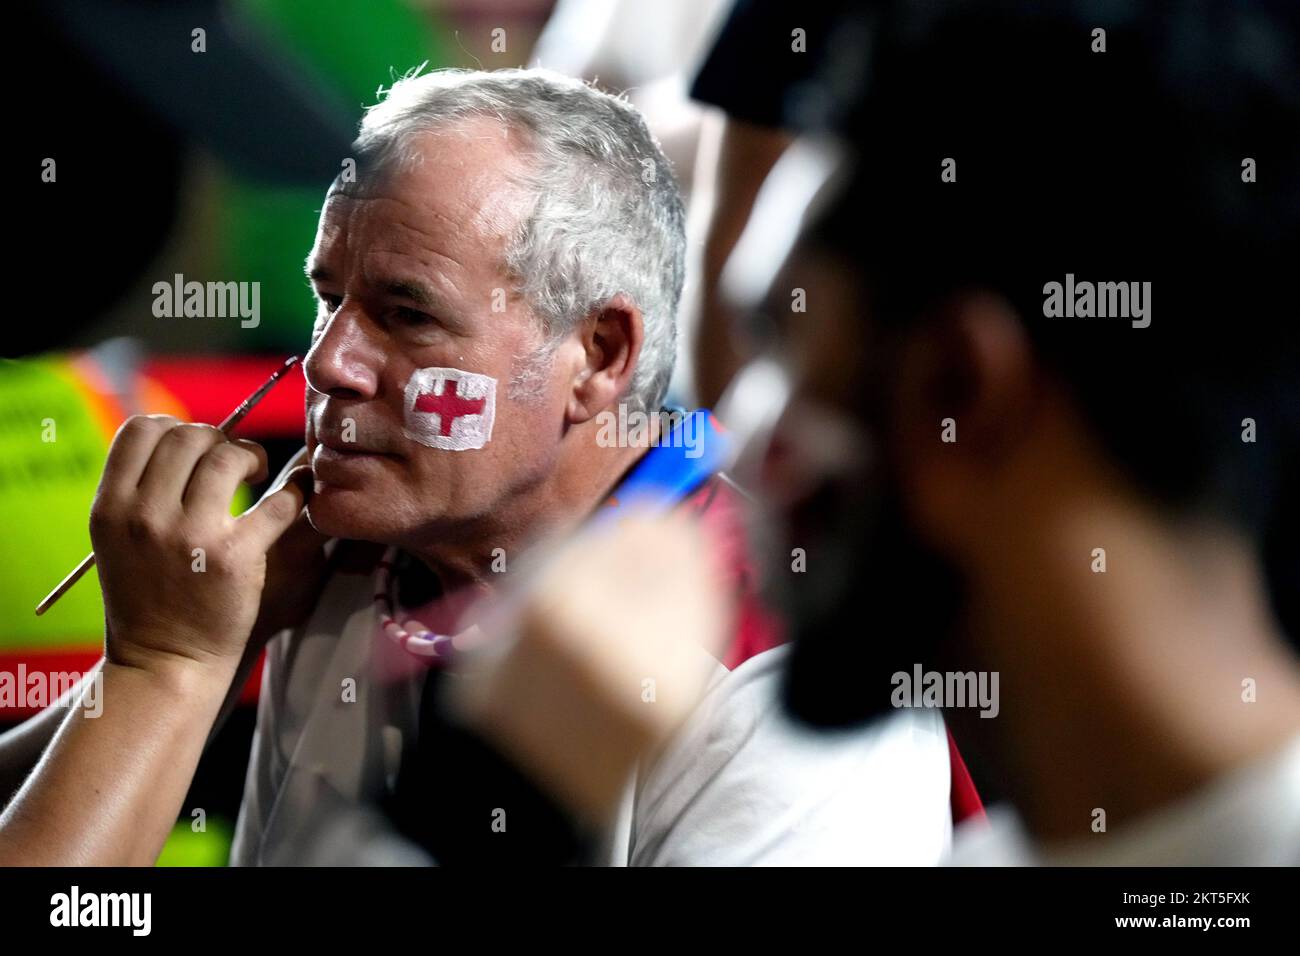 An England fan has a St George's cross painted on his cheeks ahead of the FIFA World Cup Group B match at the Ahmad Bin Ali Stadium, Al Rayyan, Qatar. Picture date: Tuesday November 29, 2022. Stock Photo